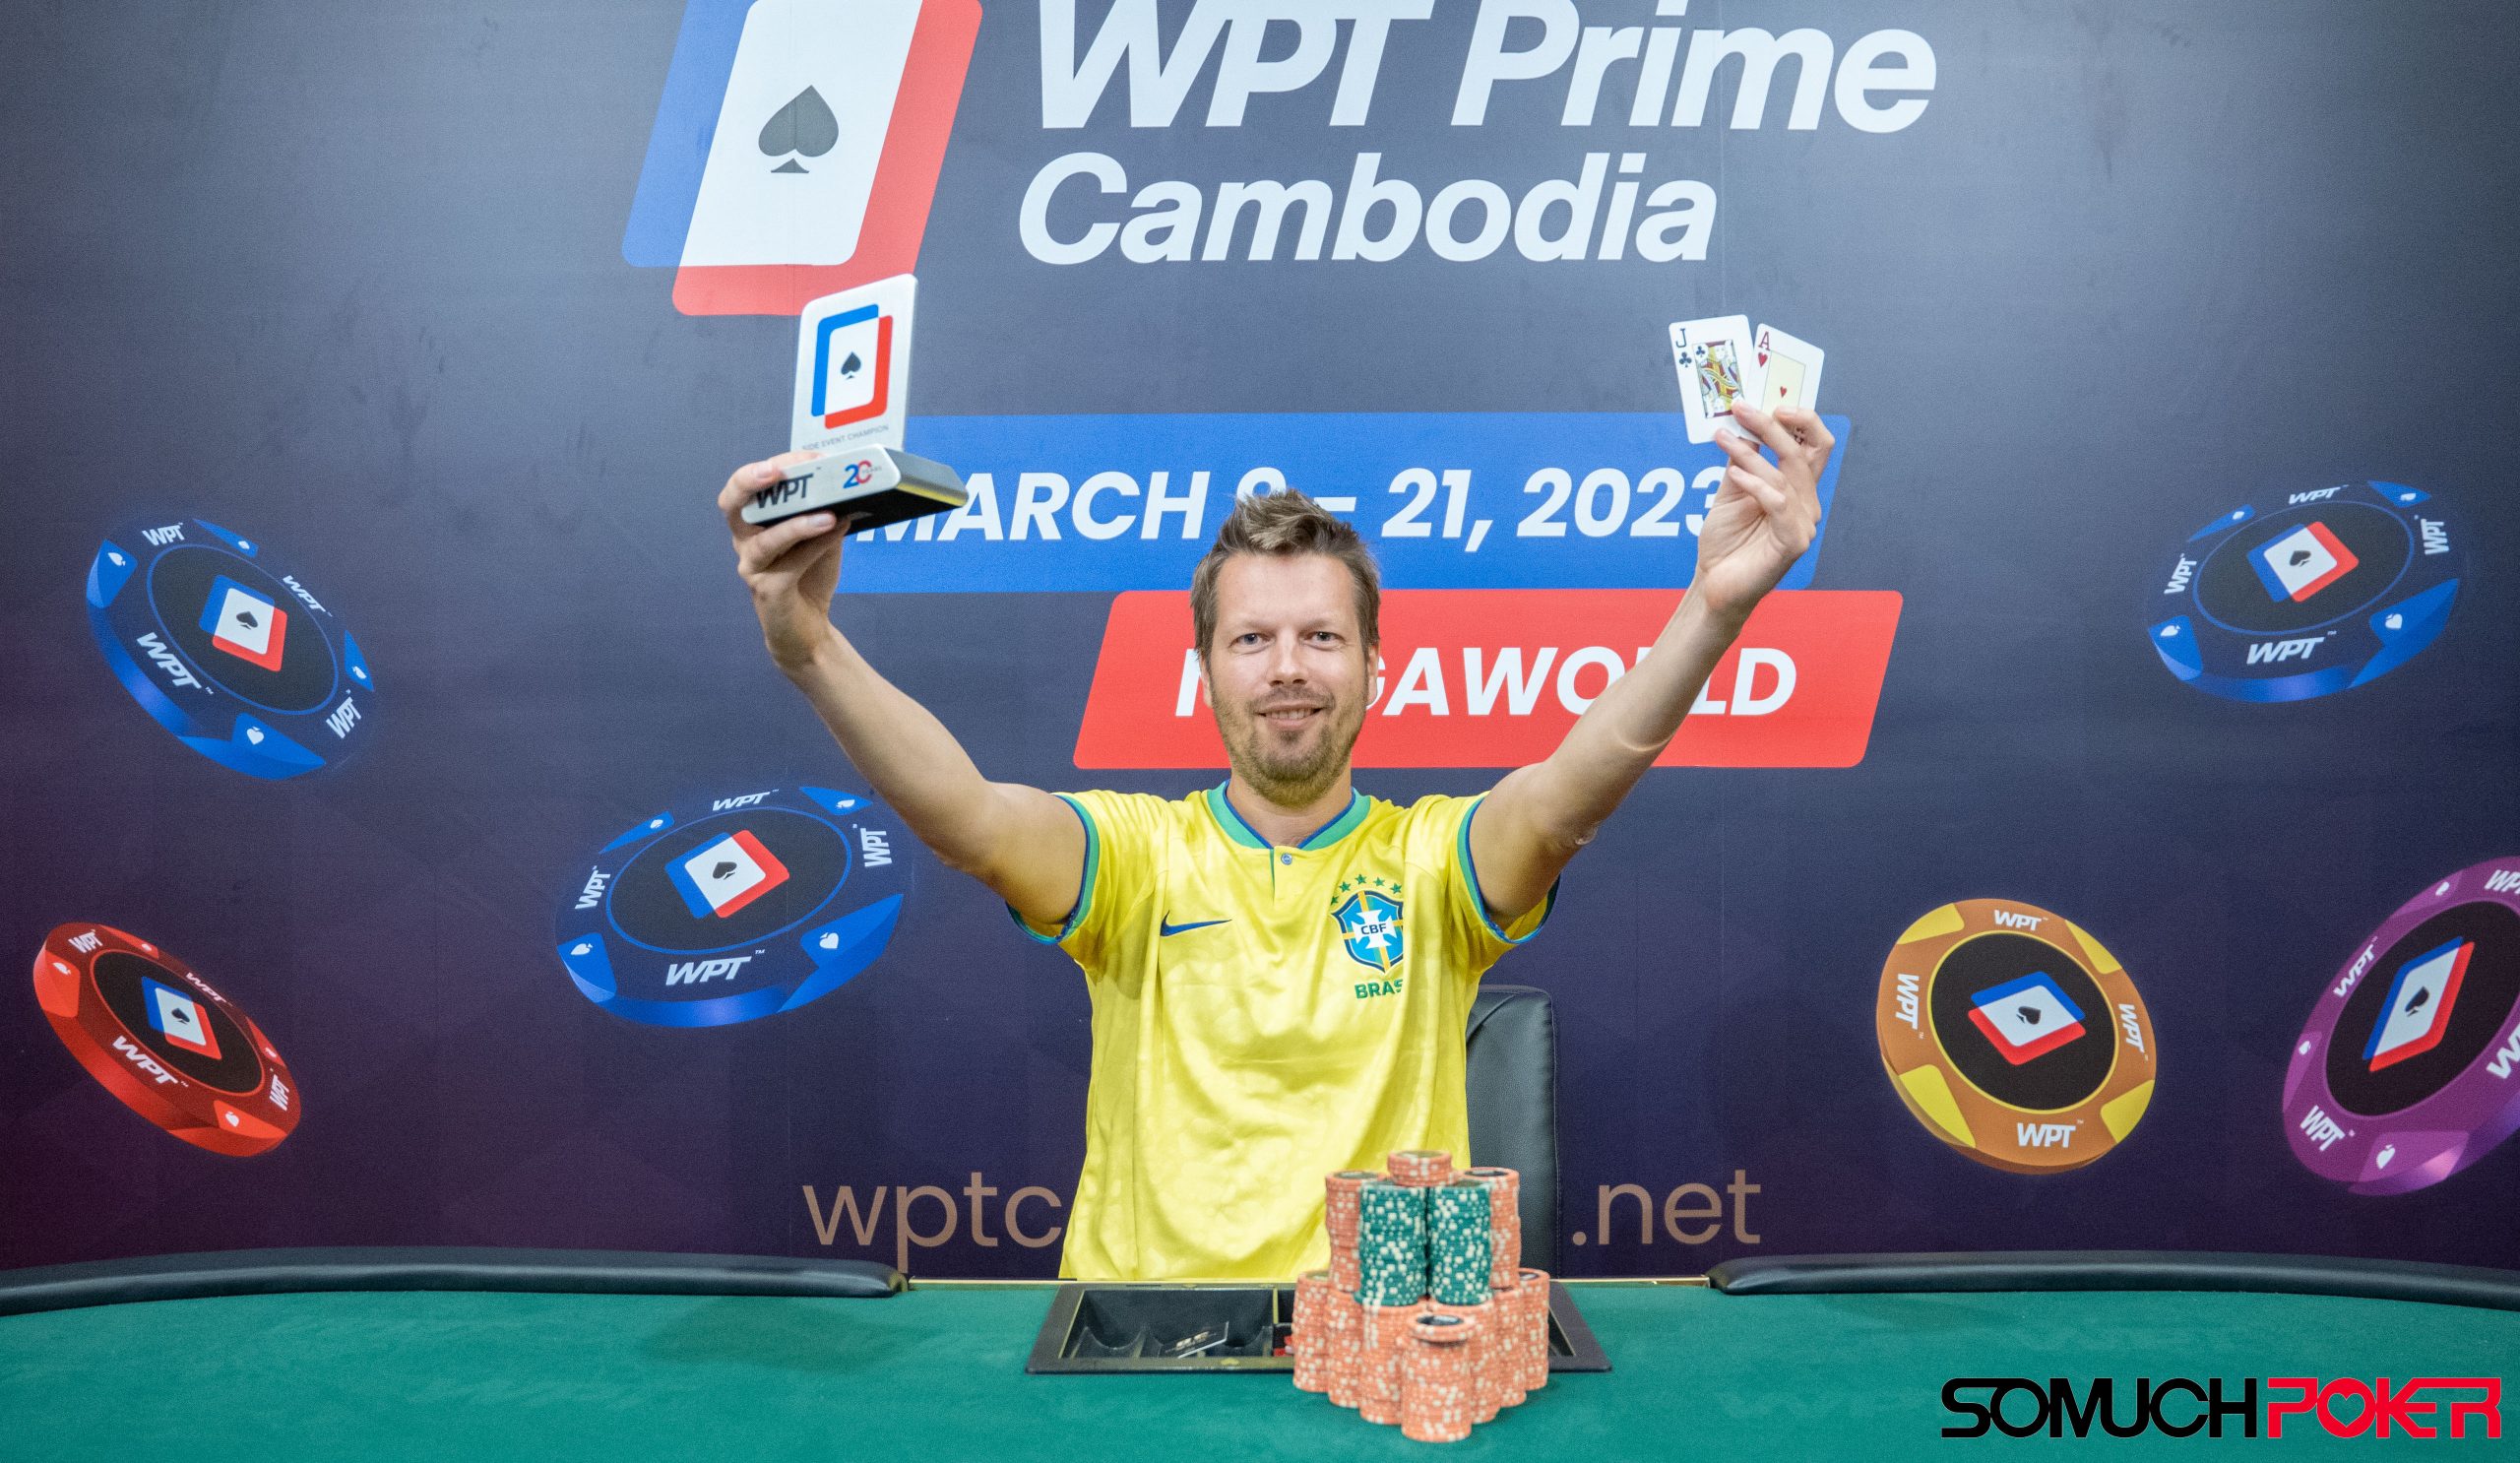 WPT Prime Cambodia: Main Event draws 1,011 total entries, 128 into Day 2; Rolands Norietis bags NLH 2-Day, closes in on Kiale Matthews in POF race